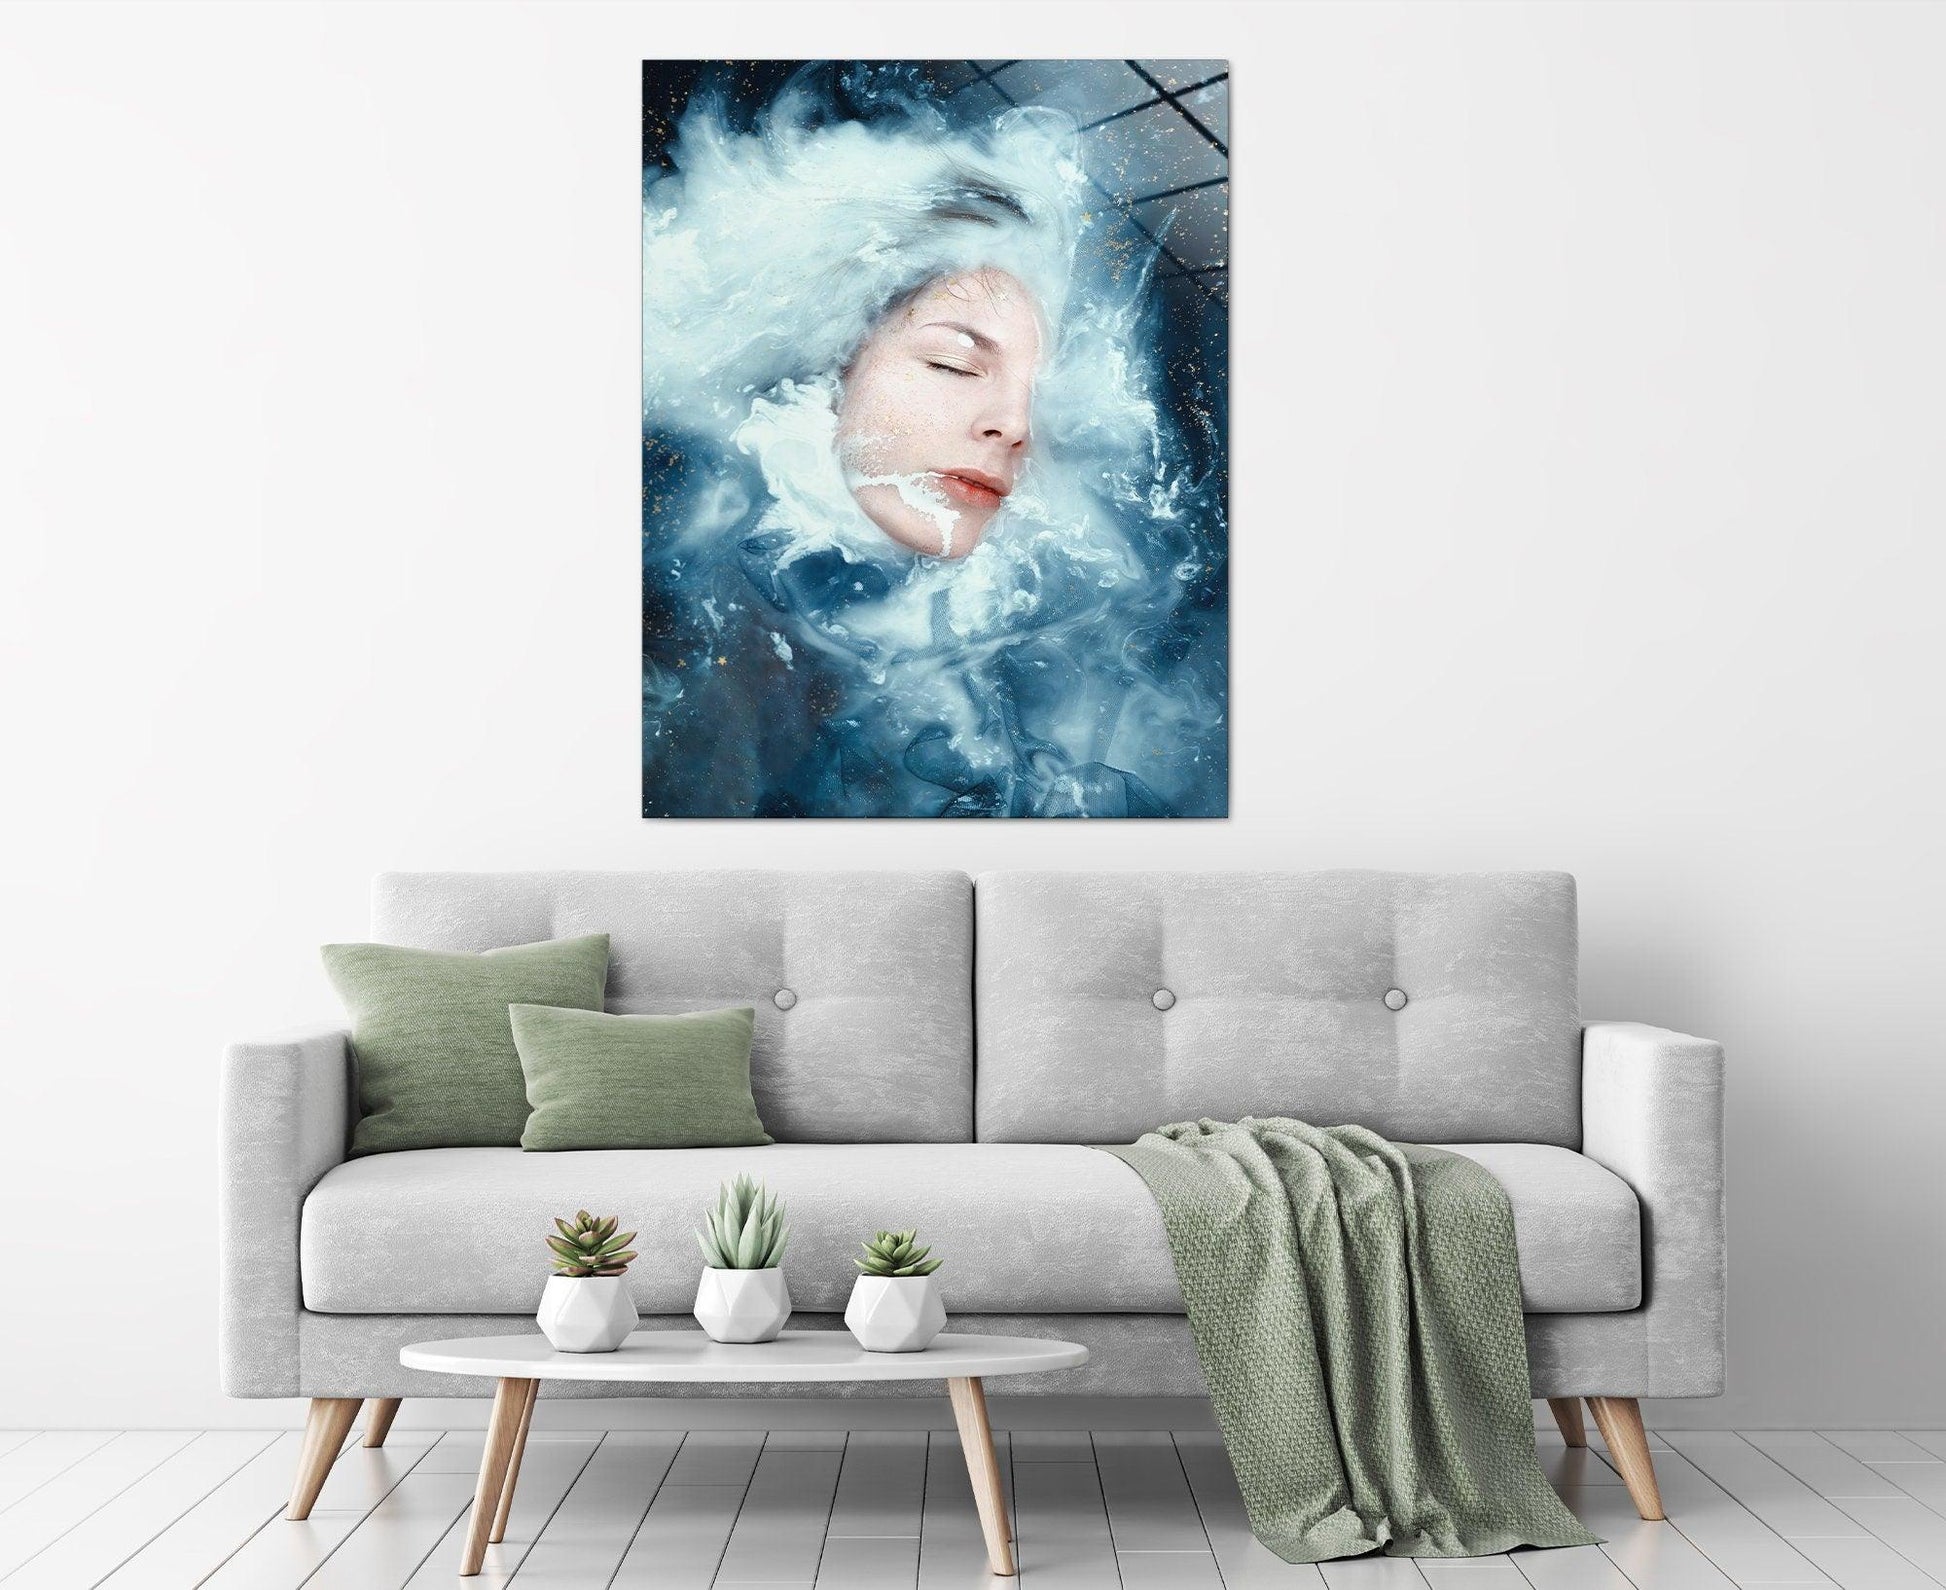 woman face canvas glass wall art, Sexual Nude Perverse Art, Girl Ass In Vivid Color, Living Room Blue Canvas, Bedroom Sex Room Poster - TrendiArt